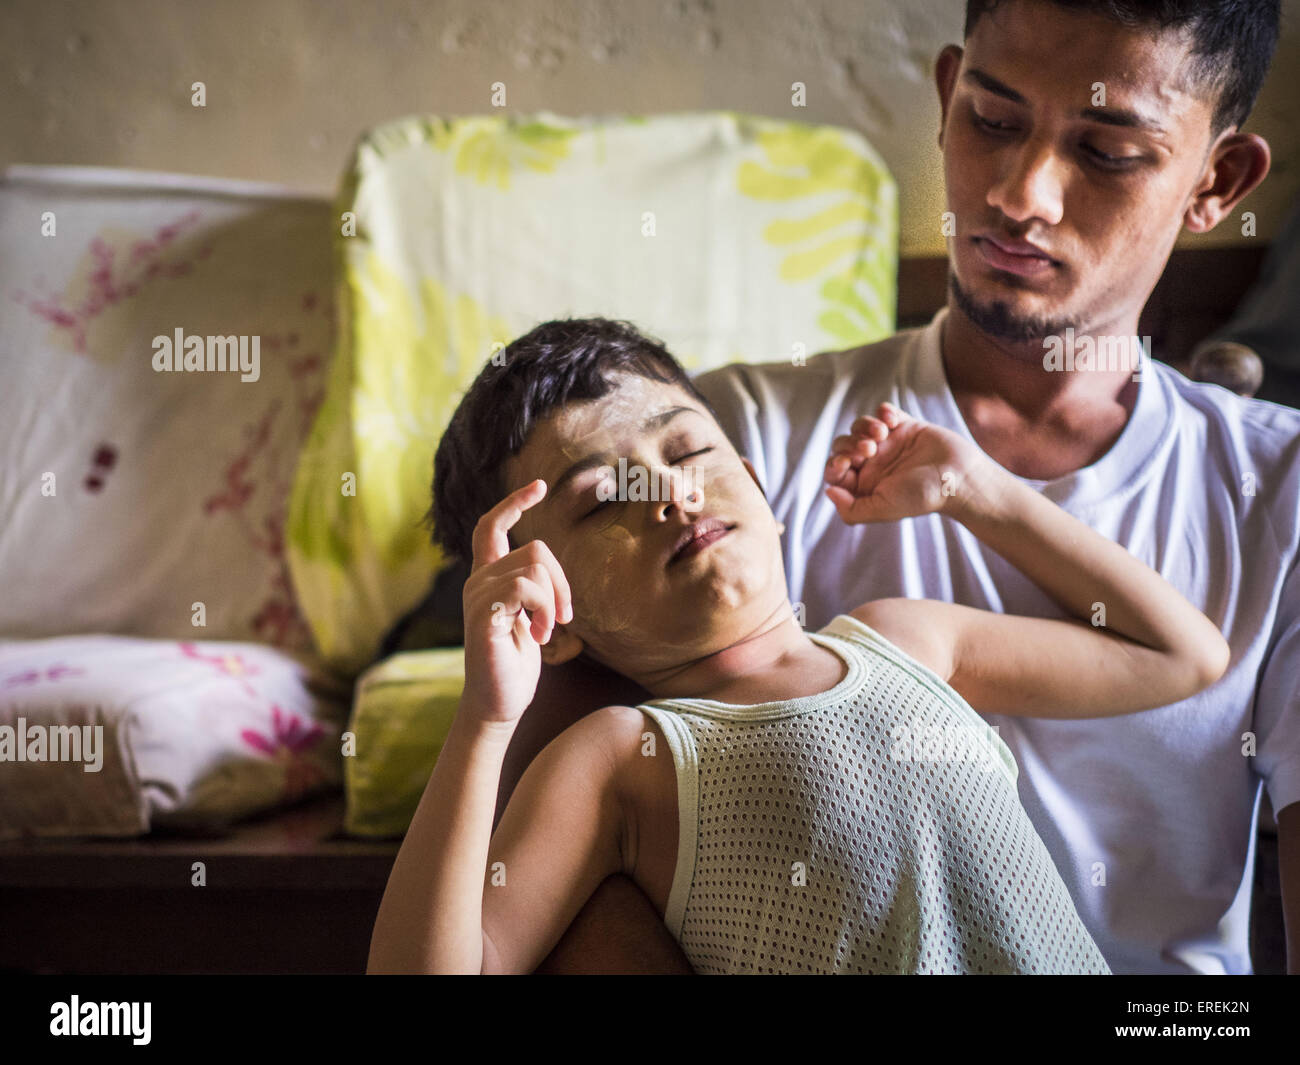 Kulai, Johore, Malaysia. 2nd June, 2015. A Rohingya man takes care of MOHAMMAD SHIDE, 6 year old, Rohingya refugee. The man helps take care of the boy when his mother is at work. The child was born healthy but developed symptoms similar to polio before they came to Malaysia from Myanmar. Now his mother can't afford a proper medical diagnosis and his condition is worsening. He is now blind and losing control of his muscular system. His mother doesn't know what is wrong with him Credit:  ZUMA Press, Inc./Alamy Live News Stock Photo